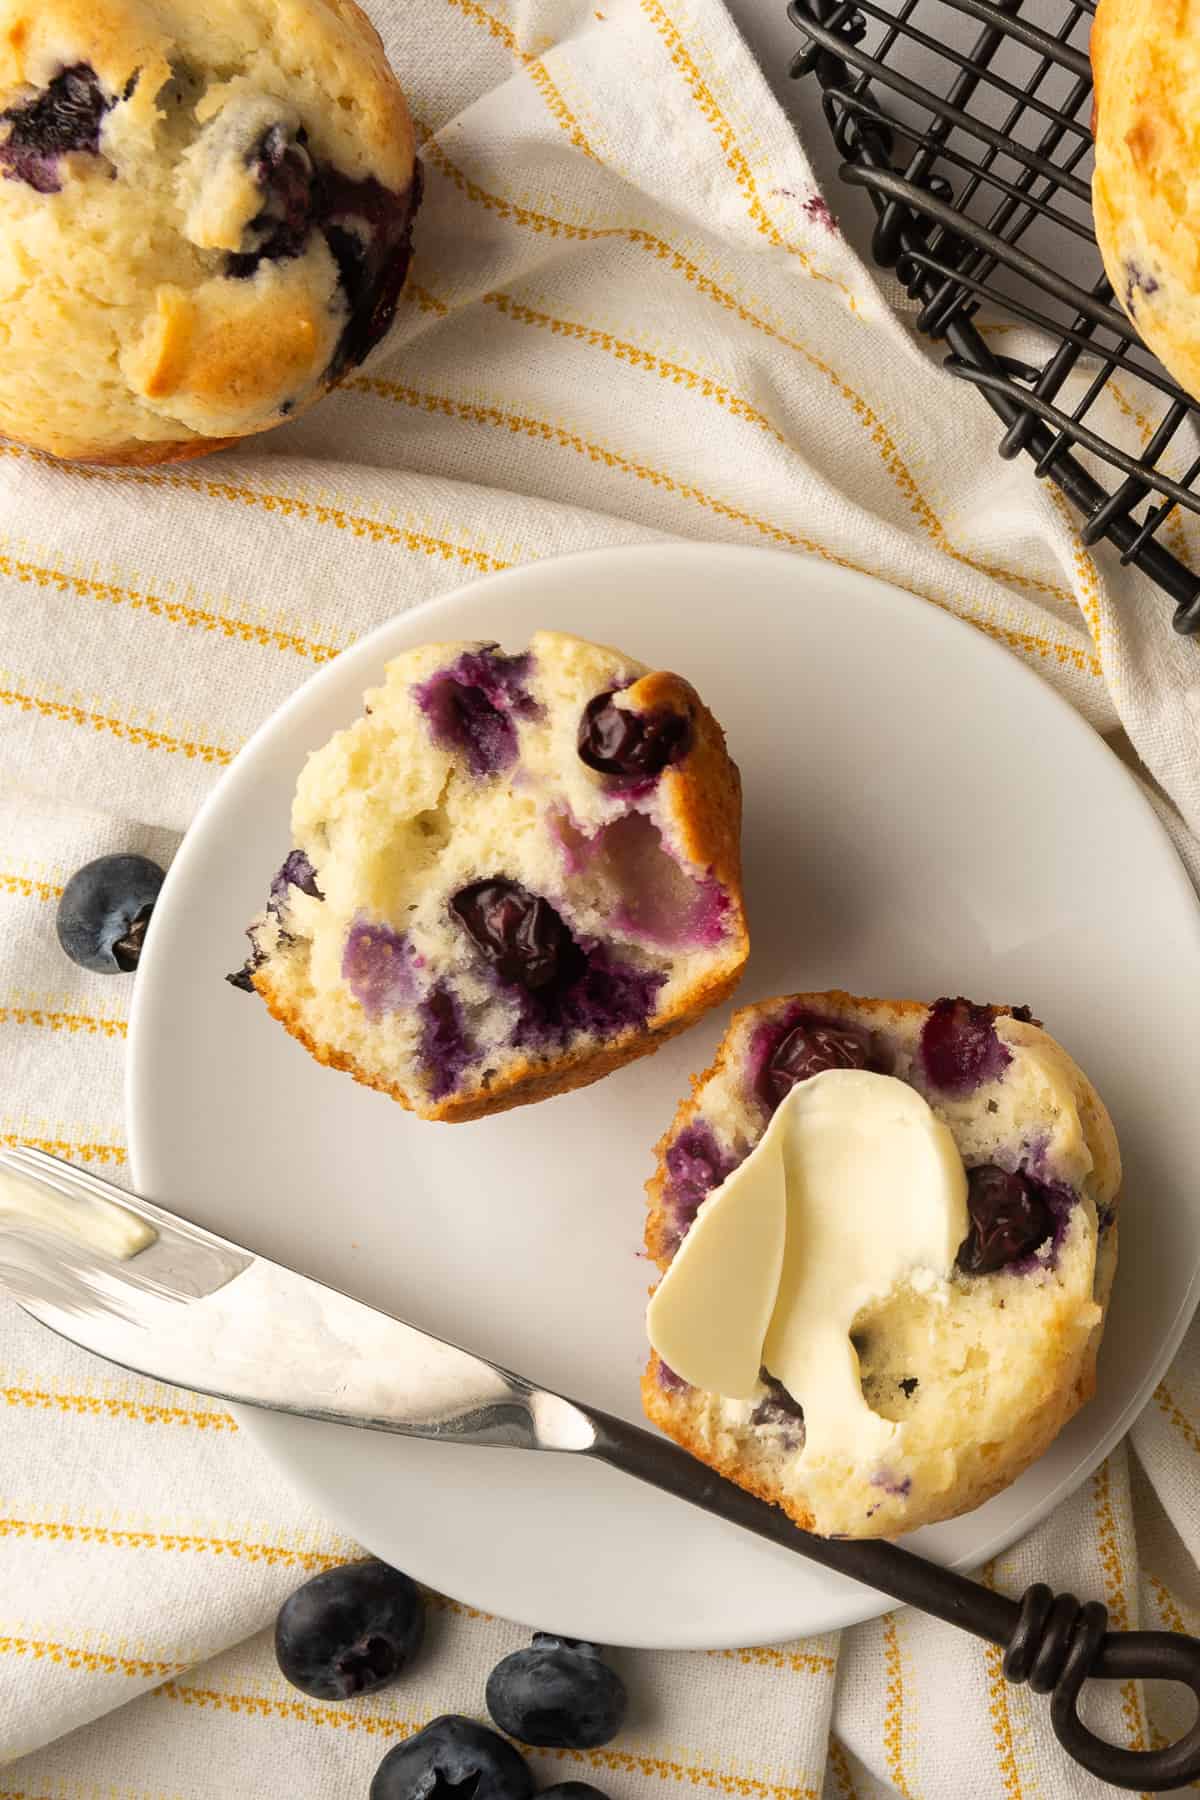 A blueberry muffin cut in half and smeared with butter.